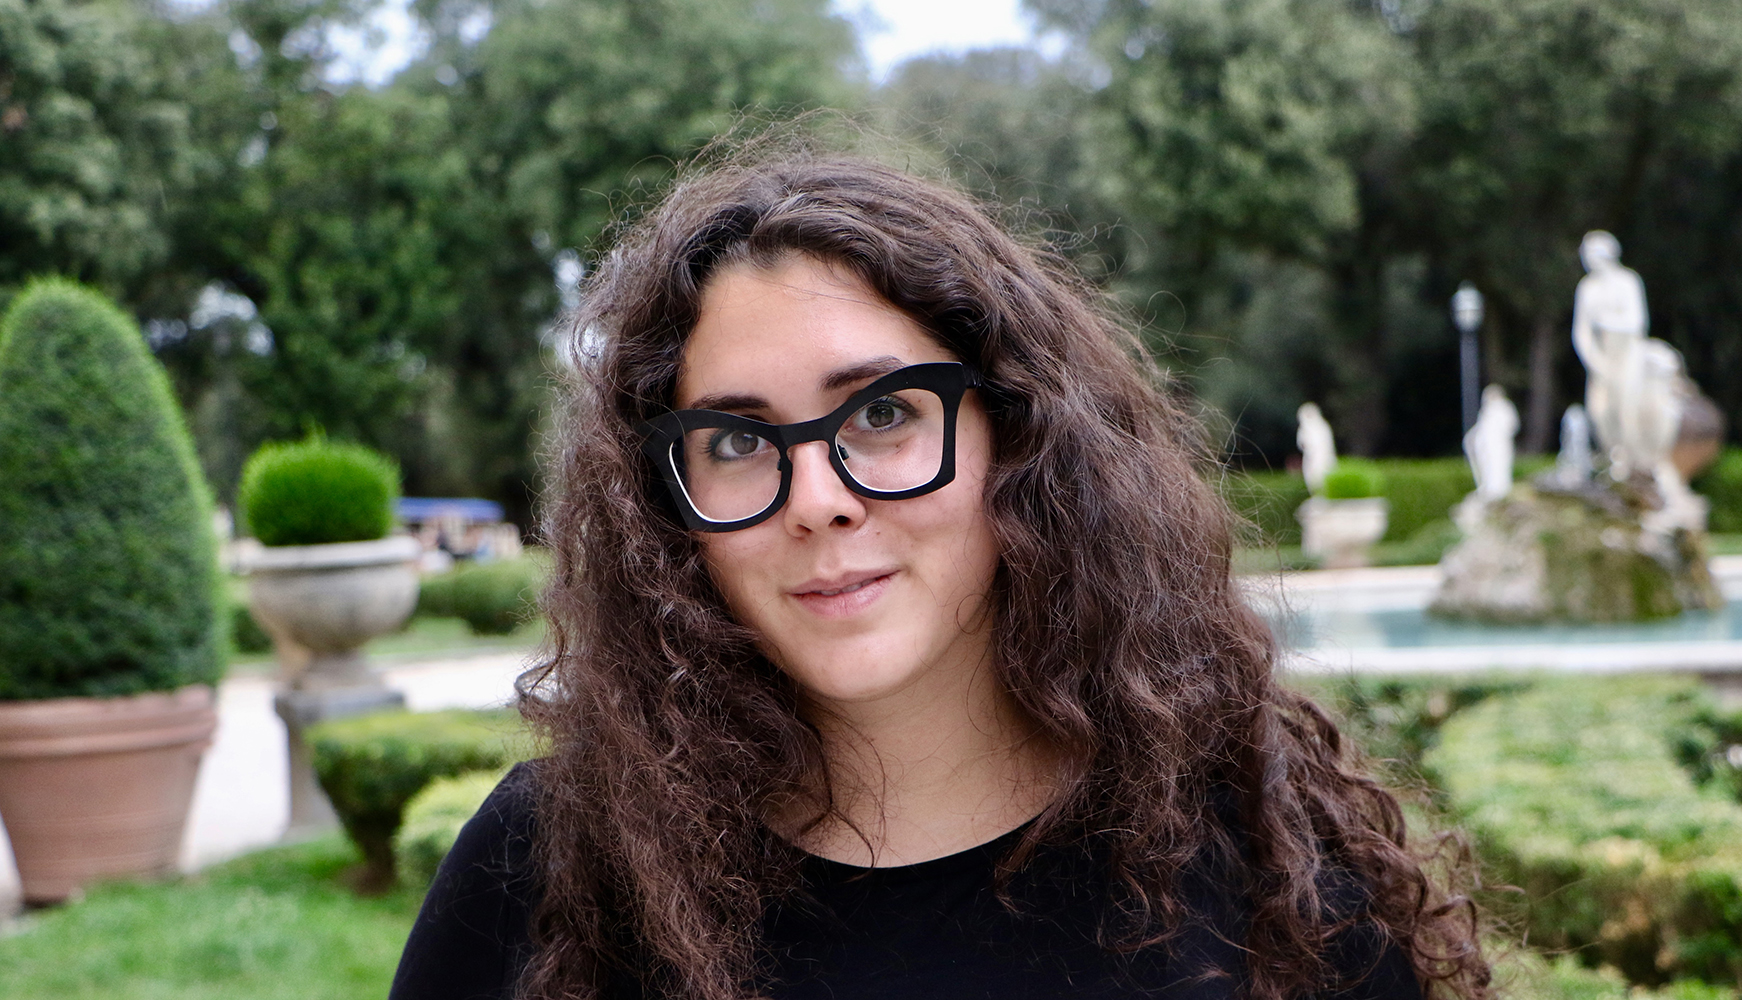 Color photograph of the head of a light skinned woman with brown hair and wearing glasses; green trees can be seen behind her as she looks at the camera